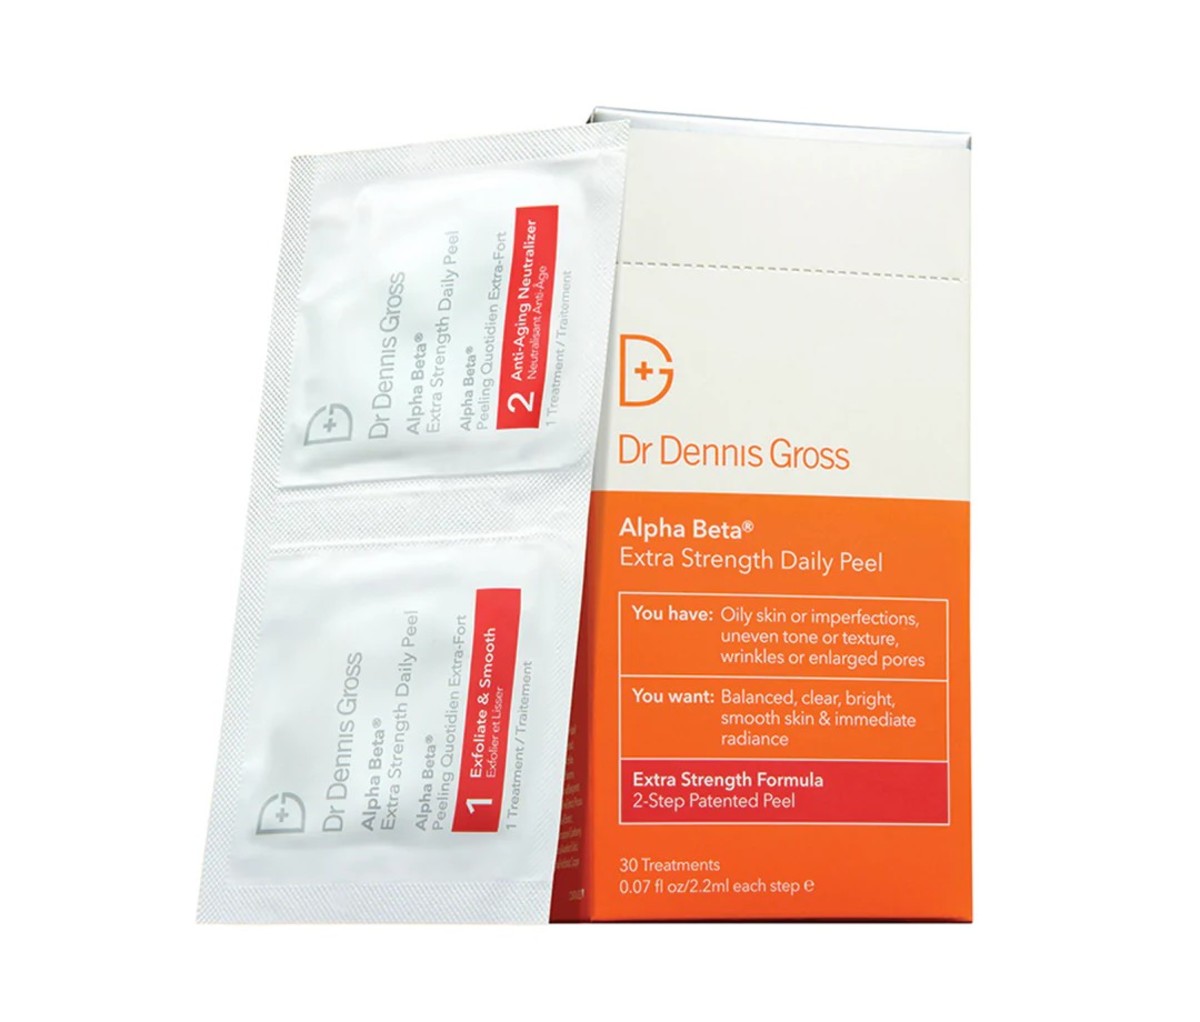 Box and double package of Dr. Dennis Gross AlphaBeta® Universal Daily Peel